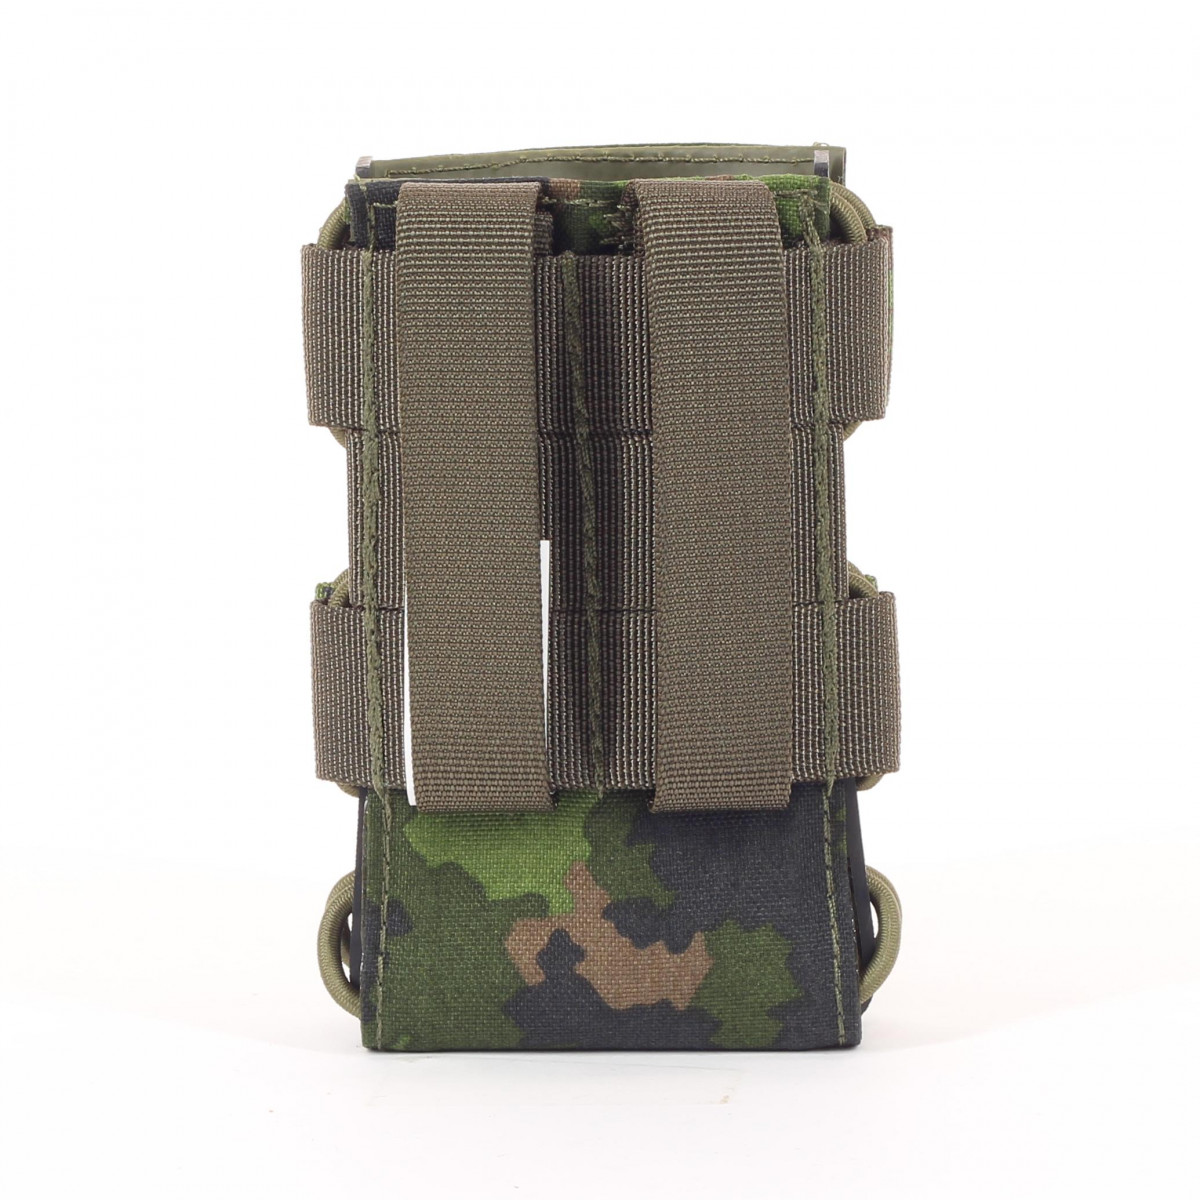 Sacoche pour chargeur à extraction rapide M4 in Finnish M05 Camo